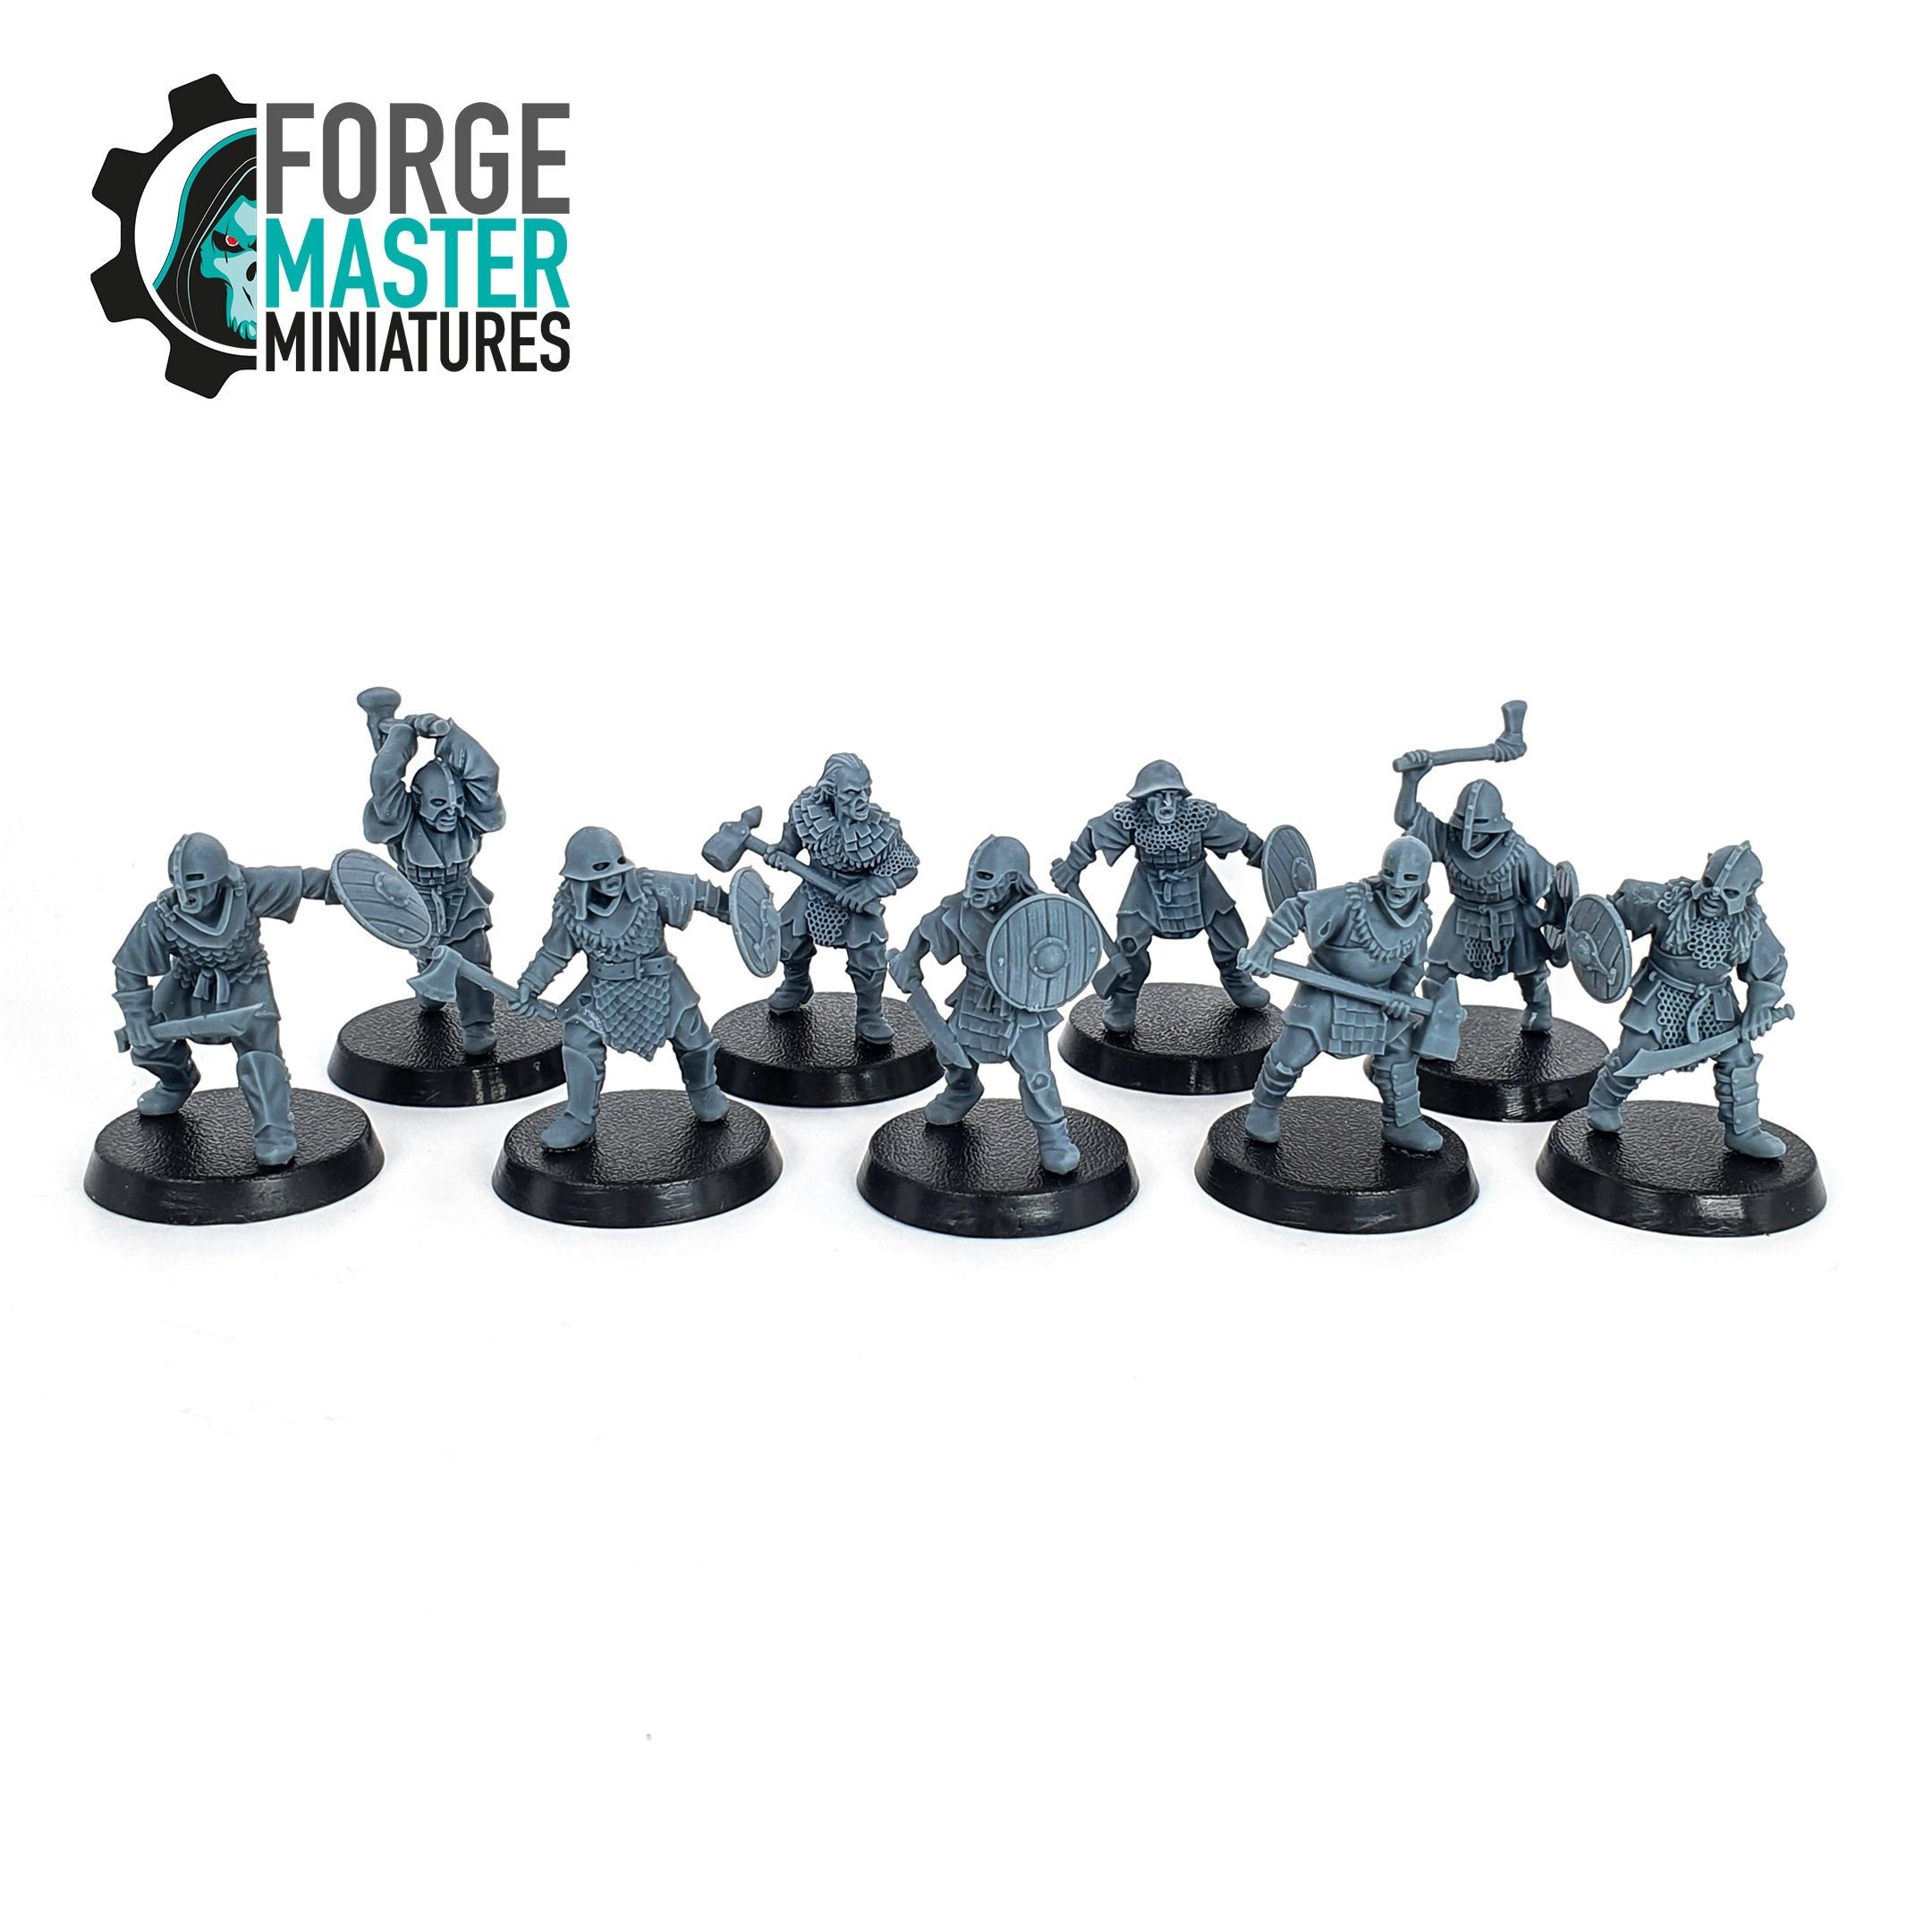 Orc Warband wargaming miniatures by Medbury Miniatures 3D printed by Forgemaster Miniatures